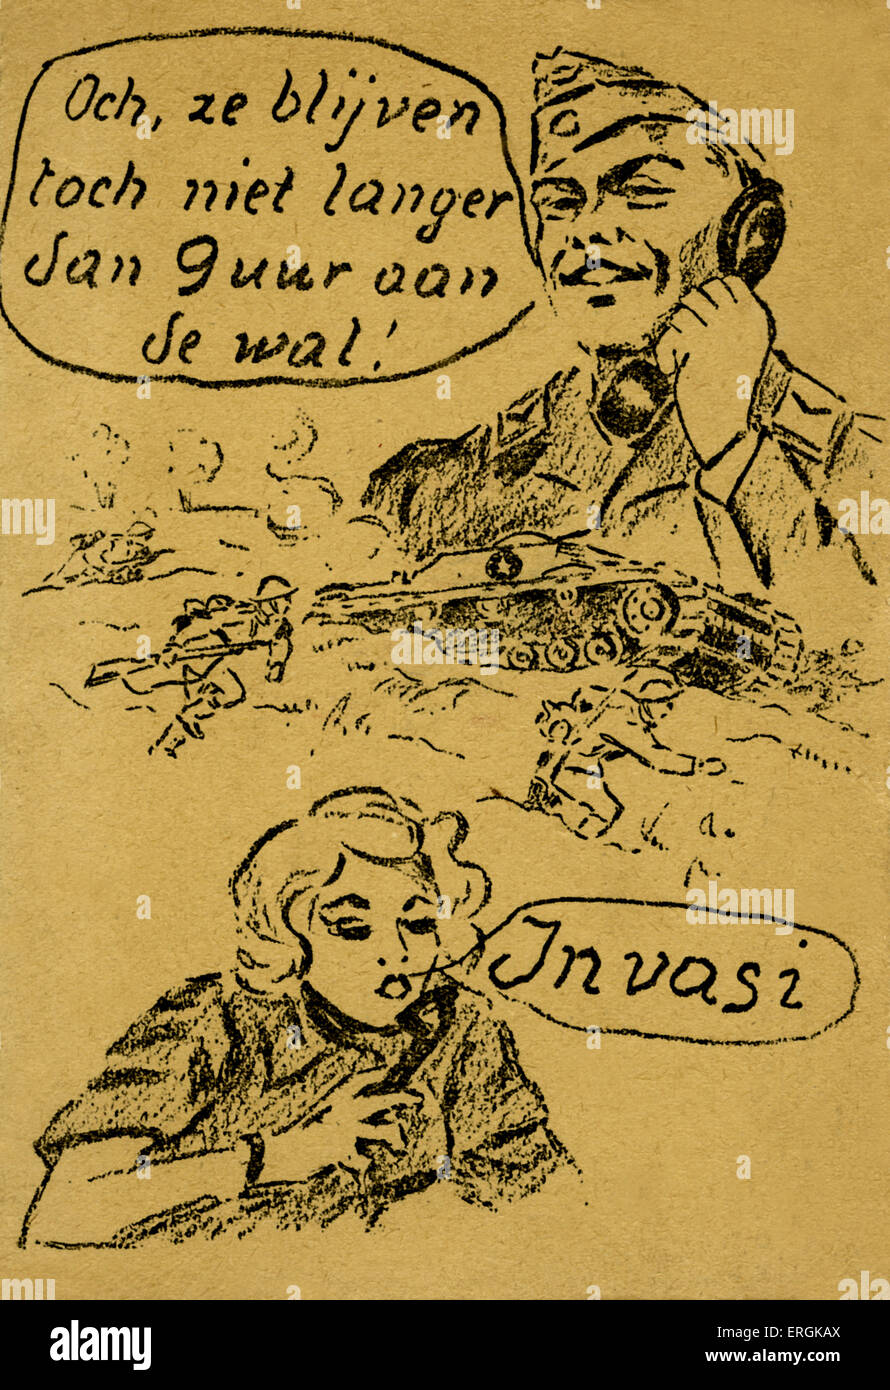 Dutch postcard from WW2: Liberation of Amsterdam. A soldier talking to a woman via telephone. Caption (solider): 'Oh, they will not stay longer than 9 hours ashore!' [Och, ze blijven toch niet langer dan 9 uur an de wal]. Caption (woman): 'Invasi' [Invasion]. Showing soliders and a tank attack. Caption on reverse: 'Drawings produced during the exciting September days of 1944. Printed on the day of liberation in Amsterdam, May 5th, 1945'. Stock Photo